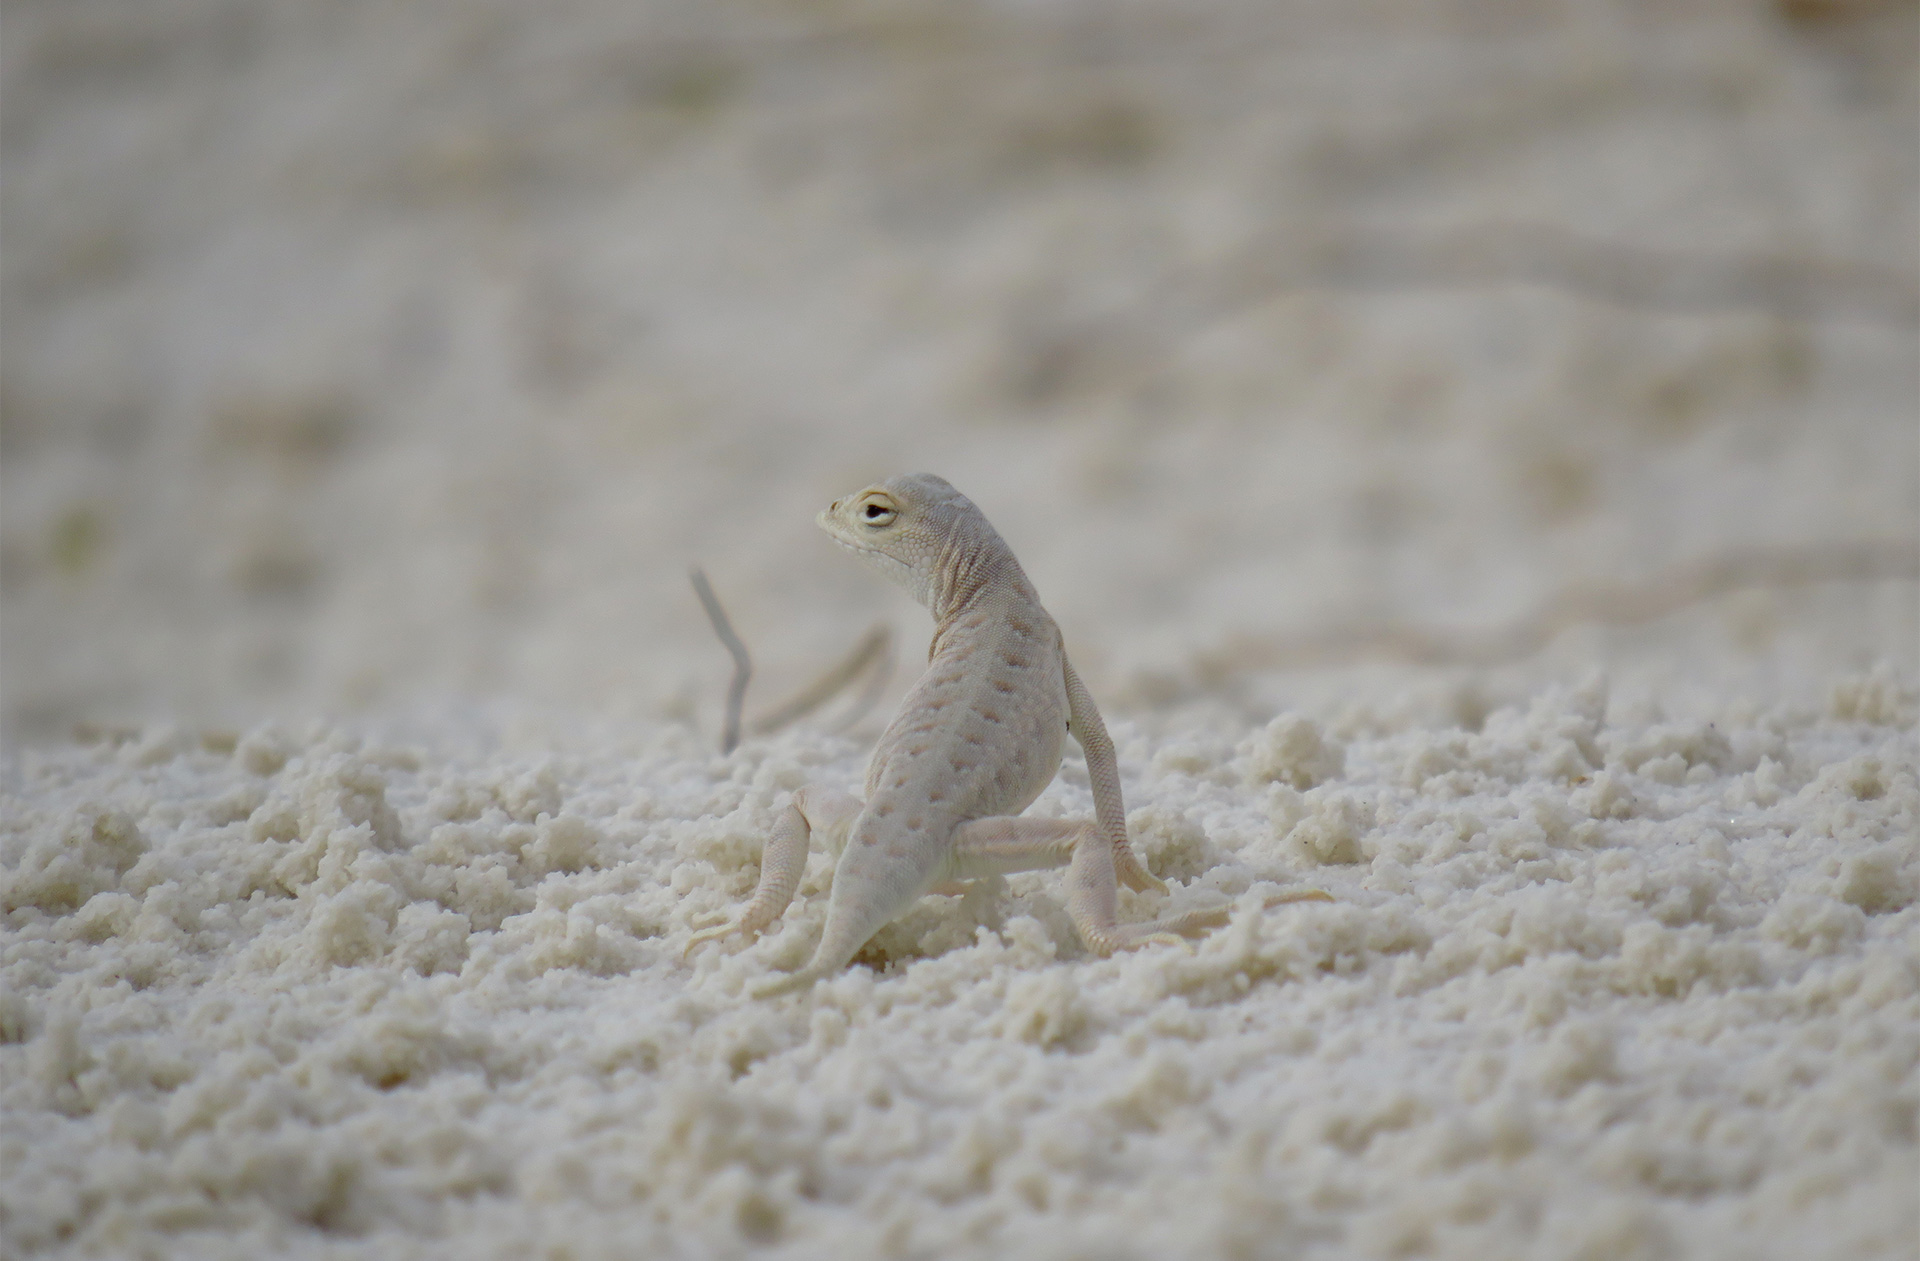 A white sand lizard almost blending into white sand.